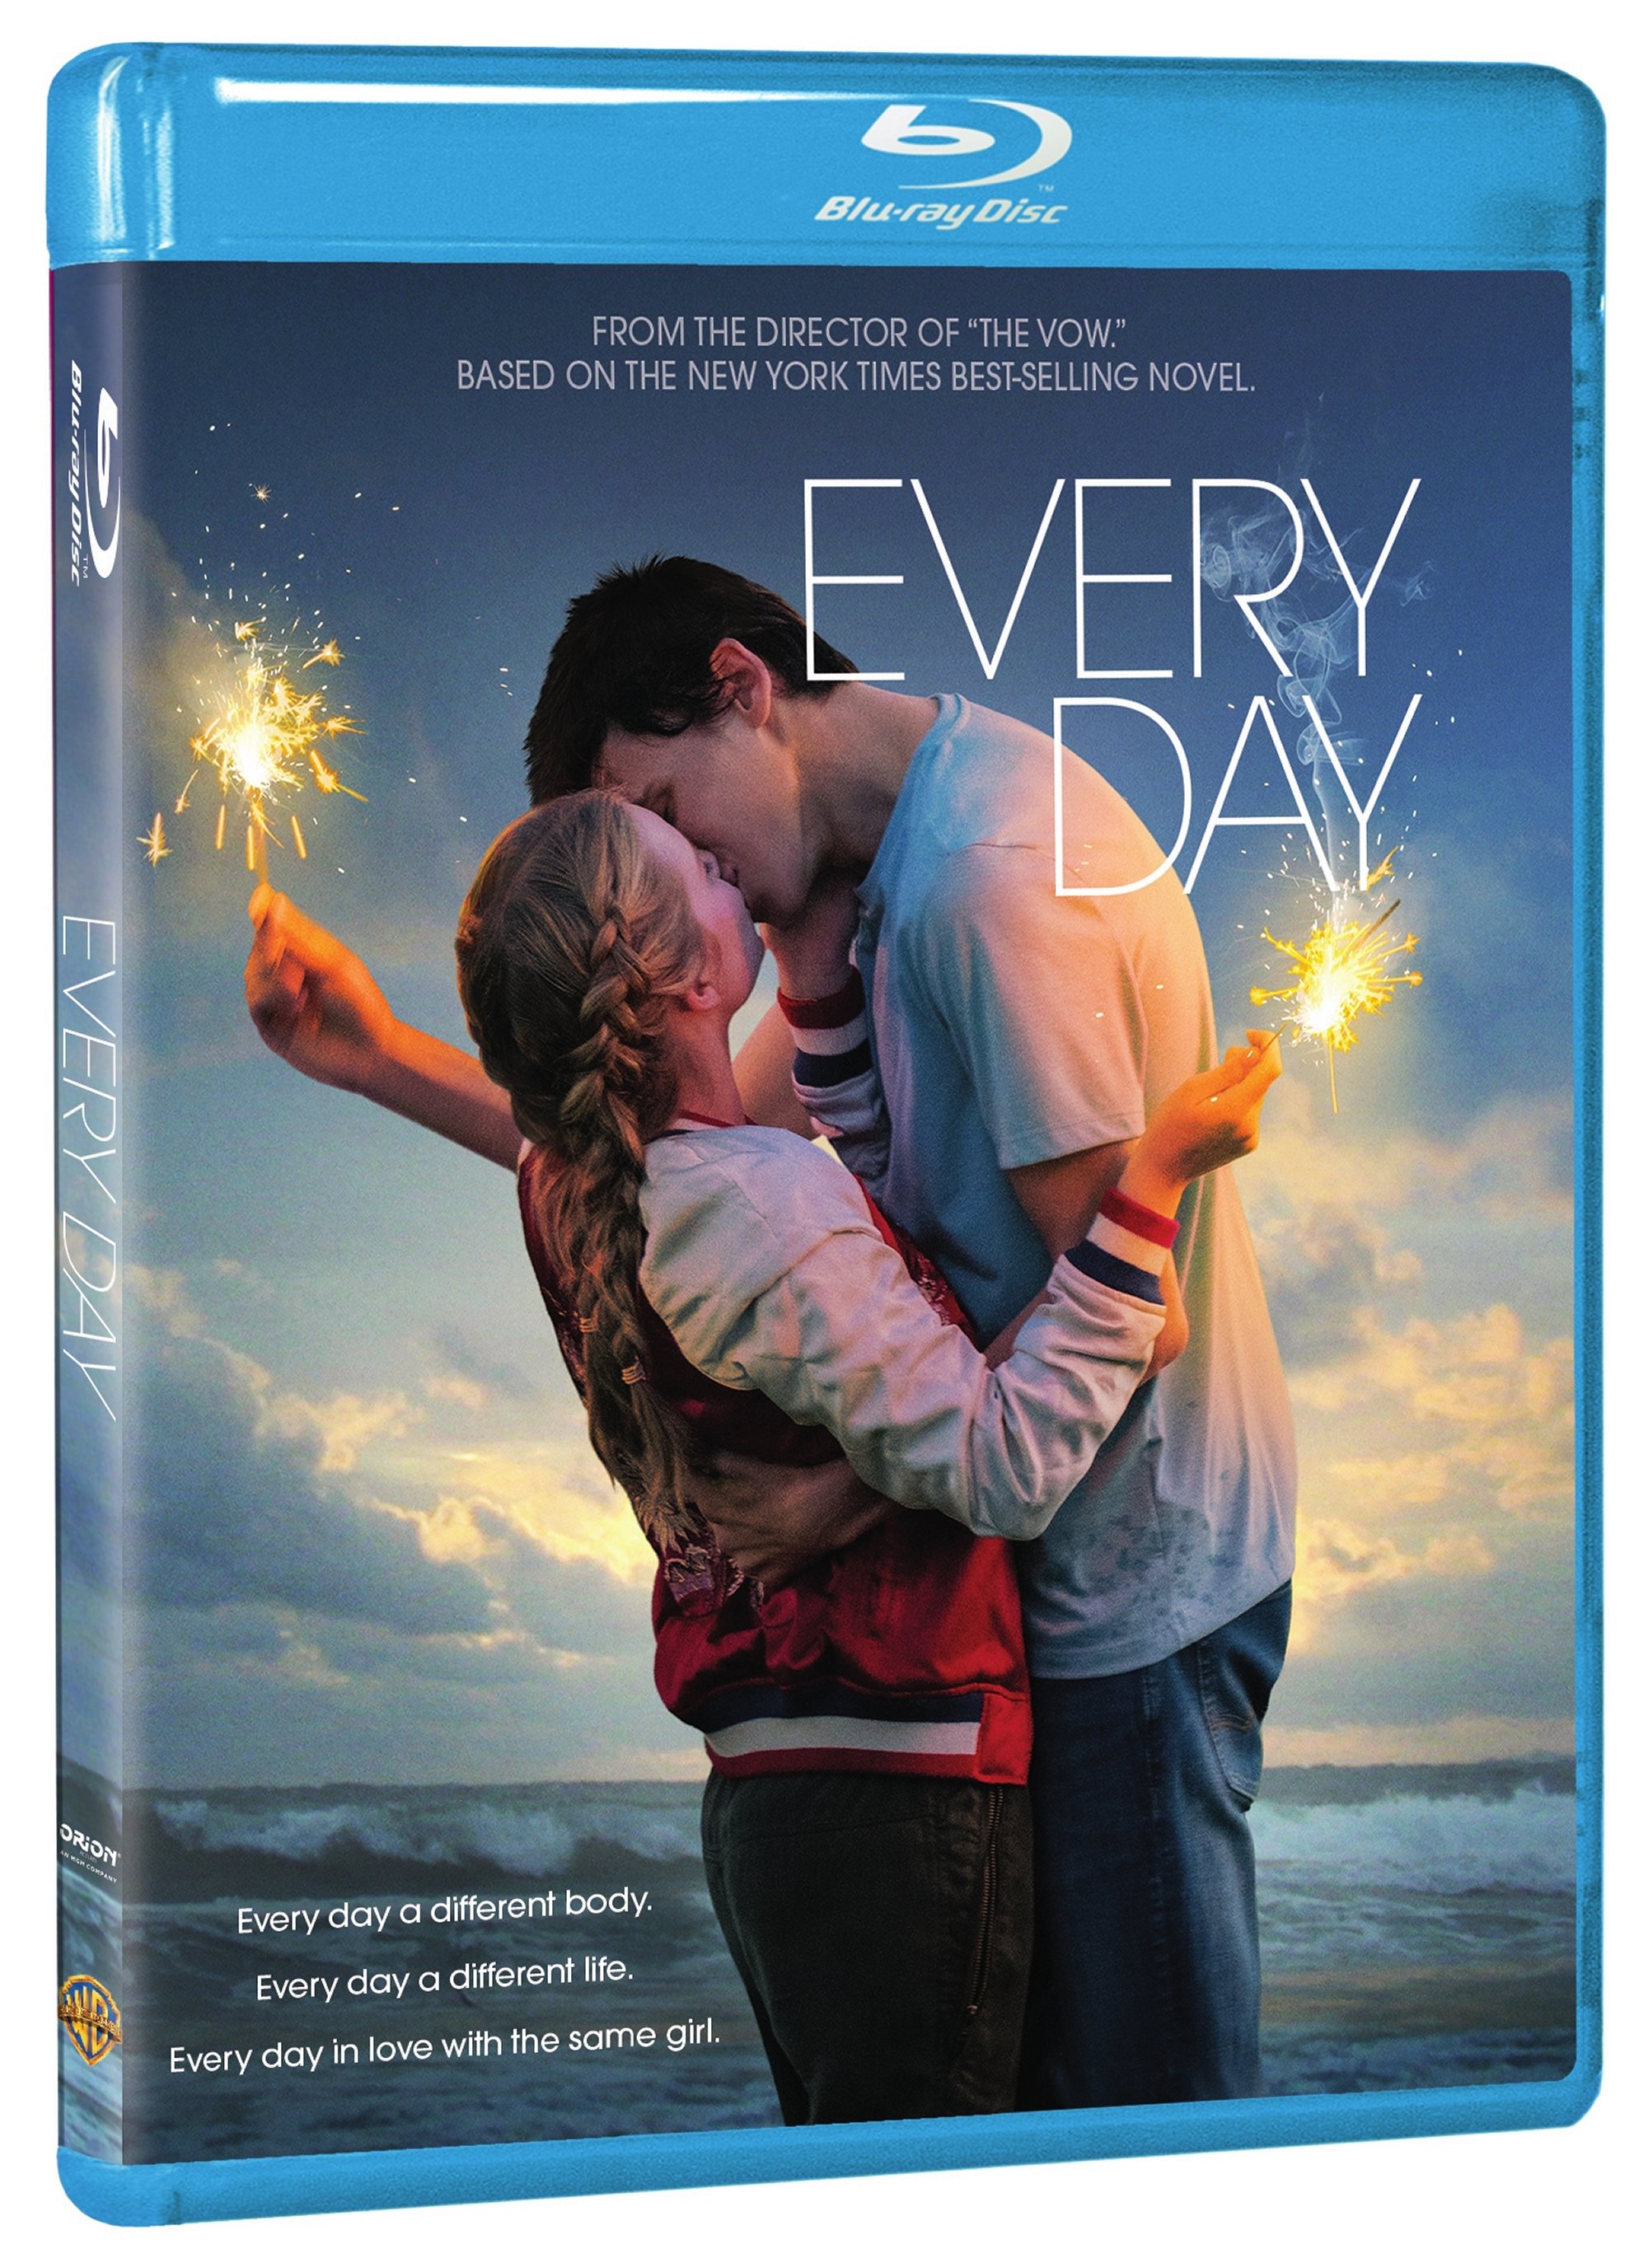 Every Day Blu-Ray Combo Pack cover (Warner Bros. Home Entertainment)